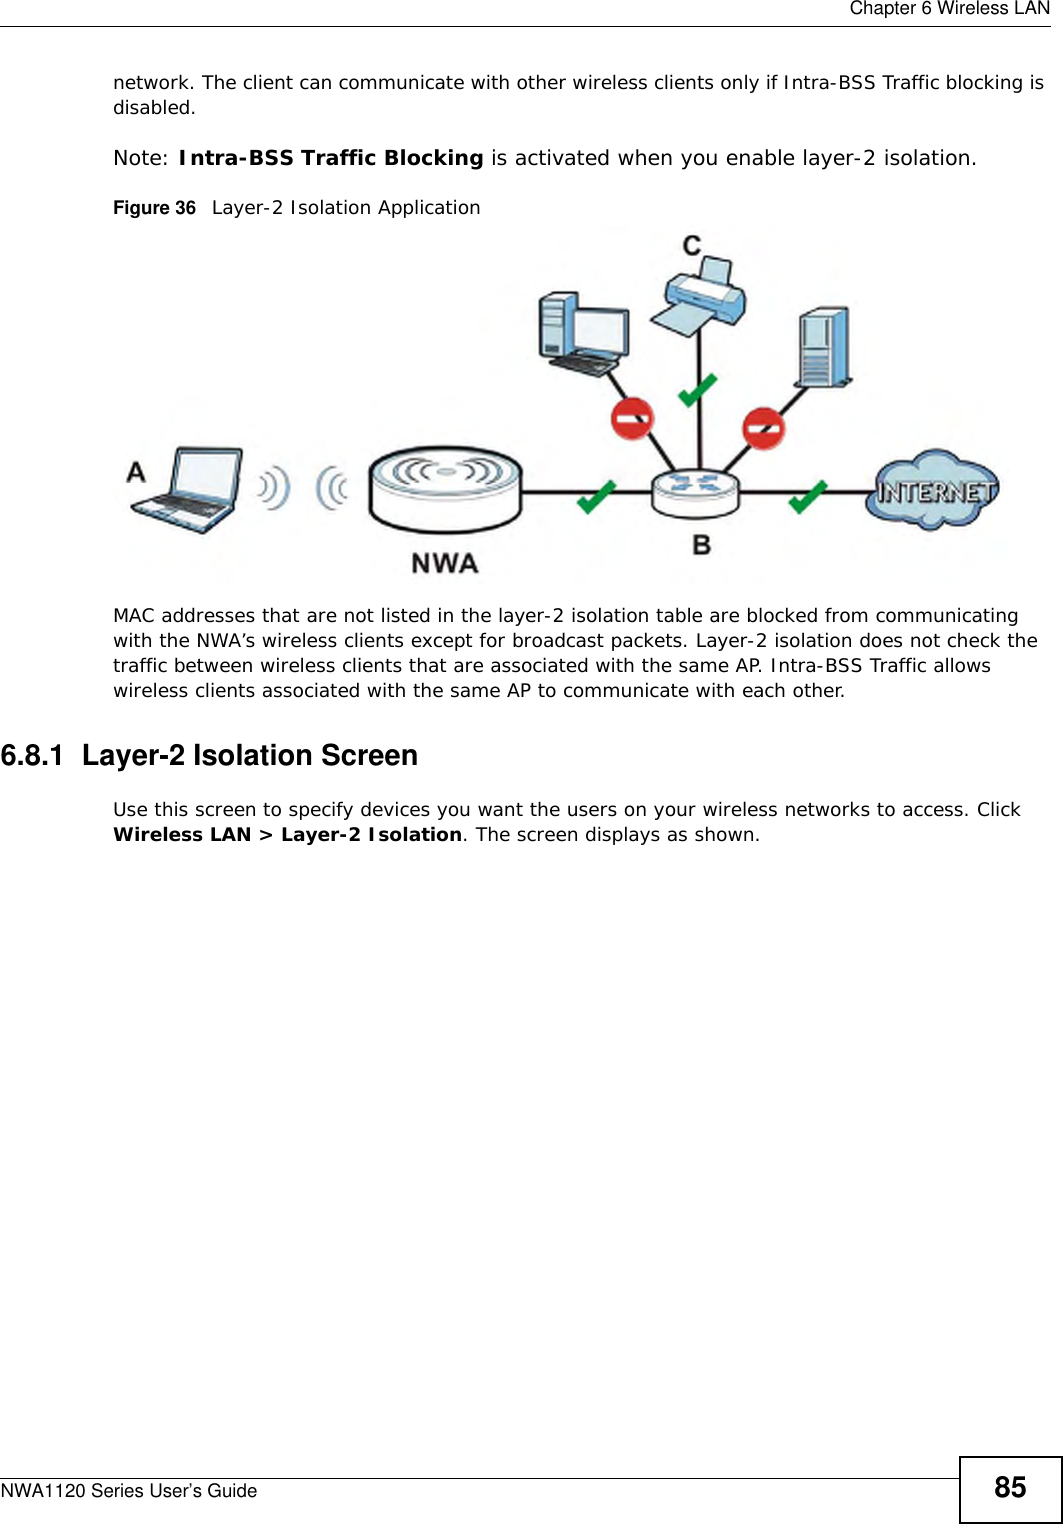  Chapter 6 Wireless LANNWA1120 Series User’s Guide 85network. The client can communicate with other wireless clients only if Intra-BSS Traffic blocking is disabled.Note: Intra-BSS Traffic Blocking is activated when you enable layer-2 isolation.Figure 36   Layer-2 Isolation ApplicationMAC addresses that are not listed in the layer-2 isolation table are blocked from communicating with the NWA’s wireless clients except for broadcast packets. Layer-2 isolation does not check the traffic between wireless clients that are associated with the same AP. Intra-BSS Traffic allows wireless clients associated with the same AP to communicate with each other.6.8.1  Layer-2 Isolation ScreenUse this screen to specify devices you want the users on your wireless networks to access. Click Wireless LAN &gt; Layer-2 Isolation. The screen displays as shown.